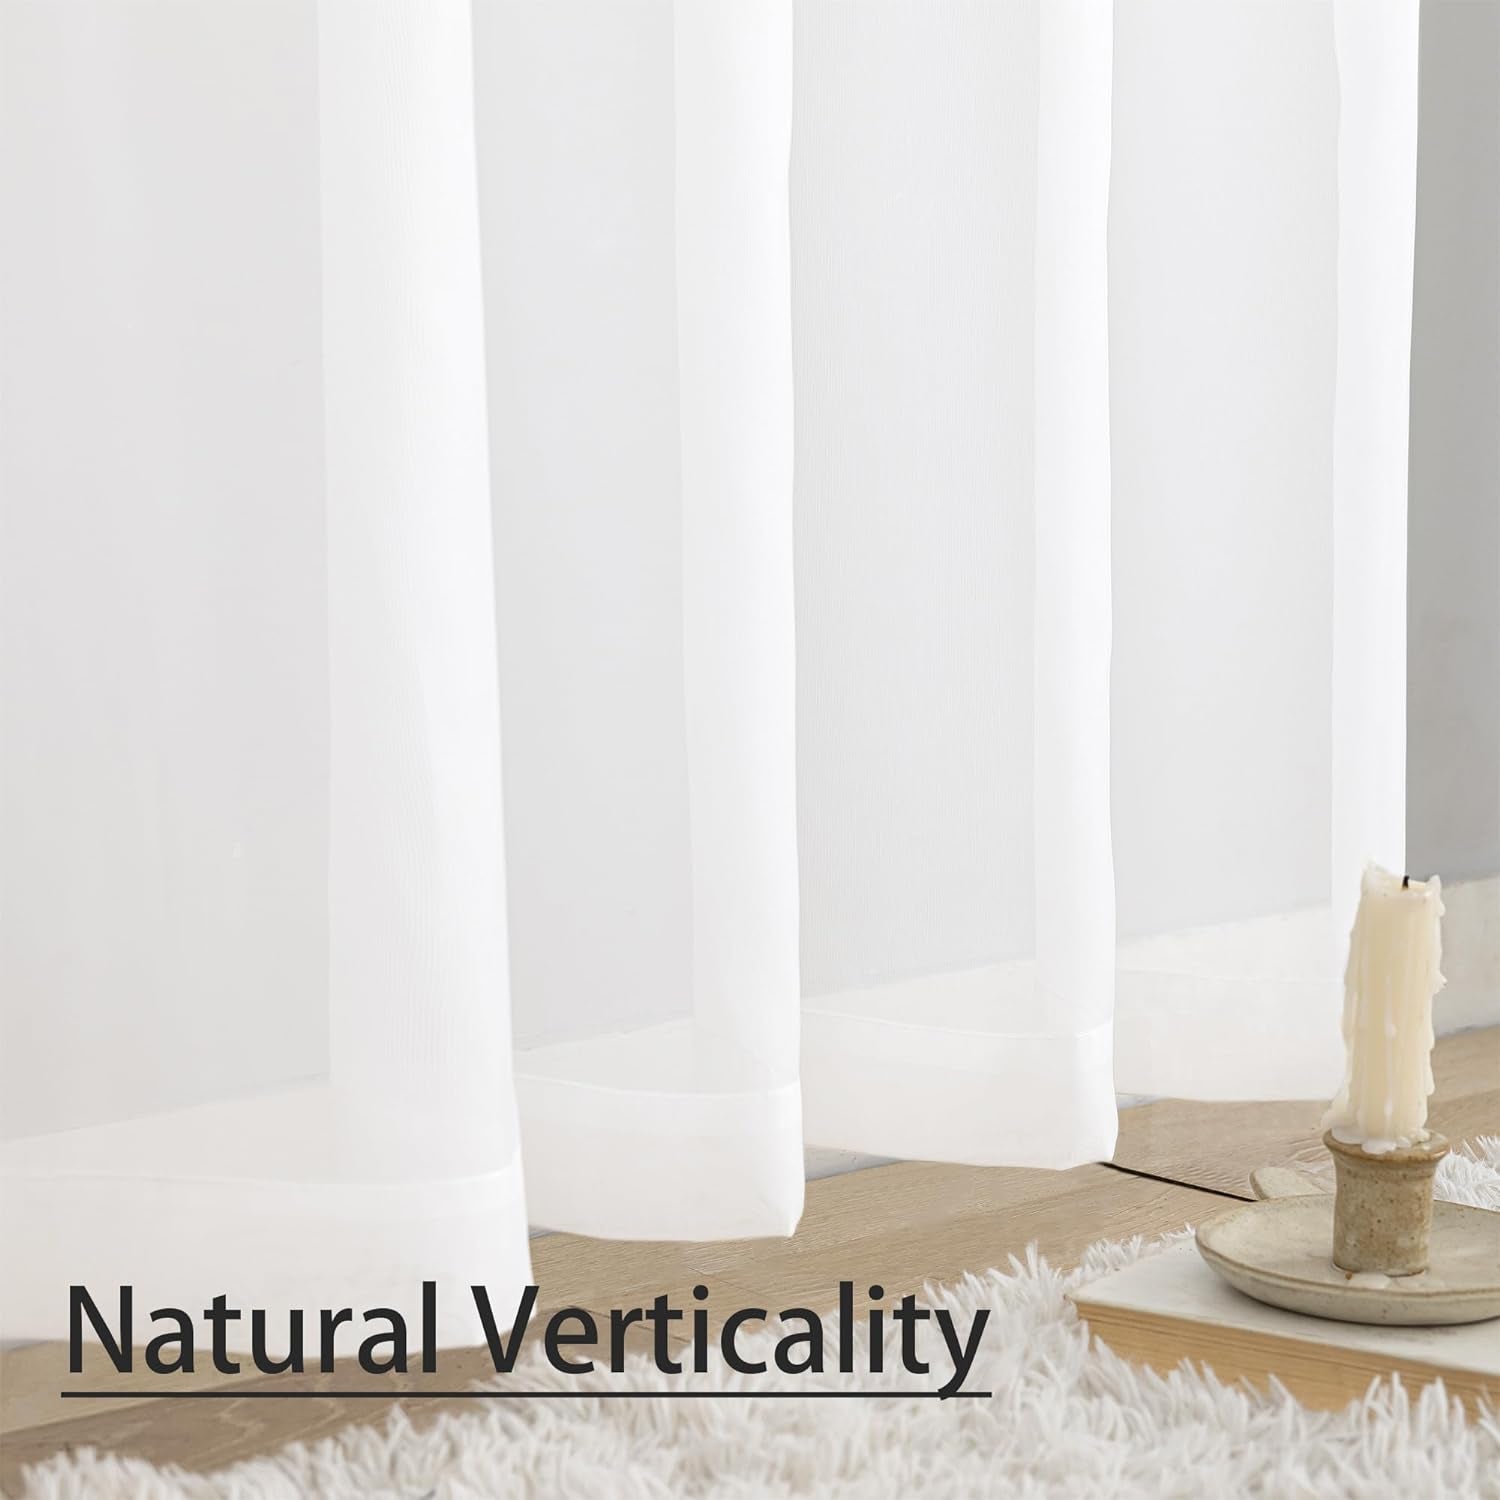 Semi Voile White Sheer Curtains 84 Inches Long 2 Panels Rod Pocket Window Treatment for Living Room Bedroom Dining Room(White 52" W X 84" L)  Karseteli   